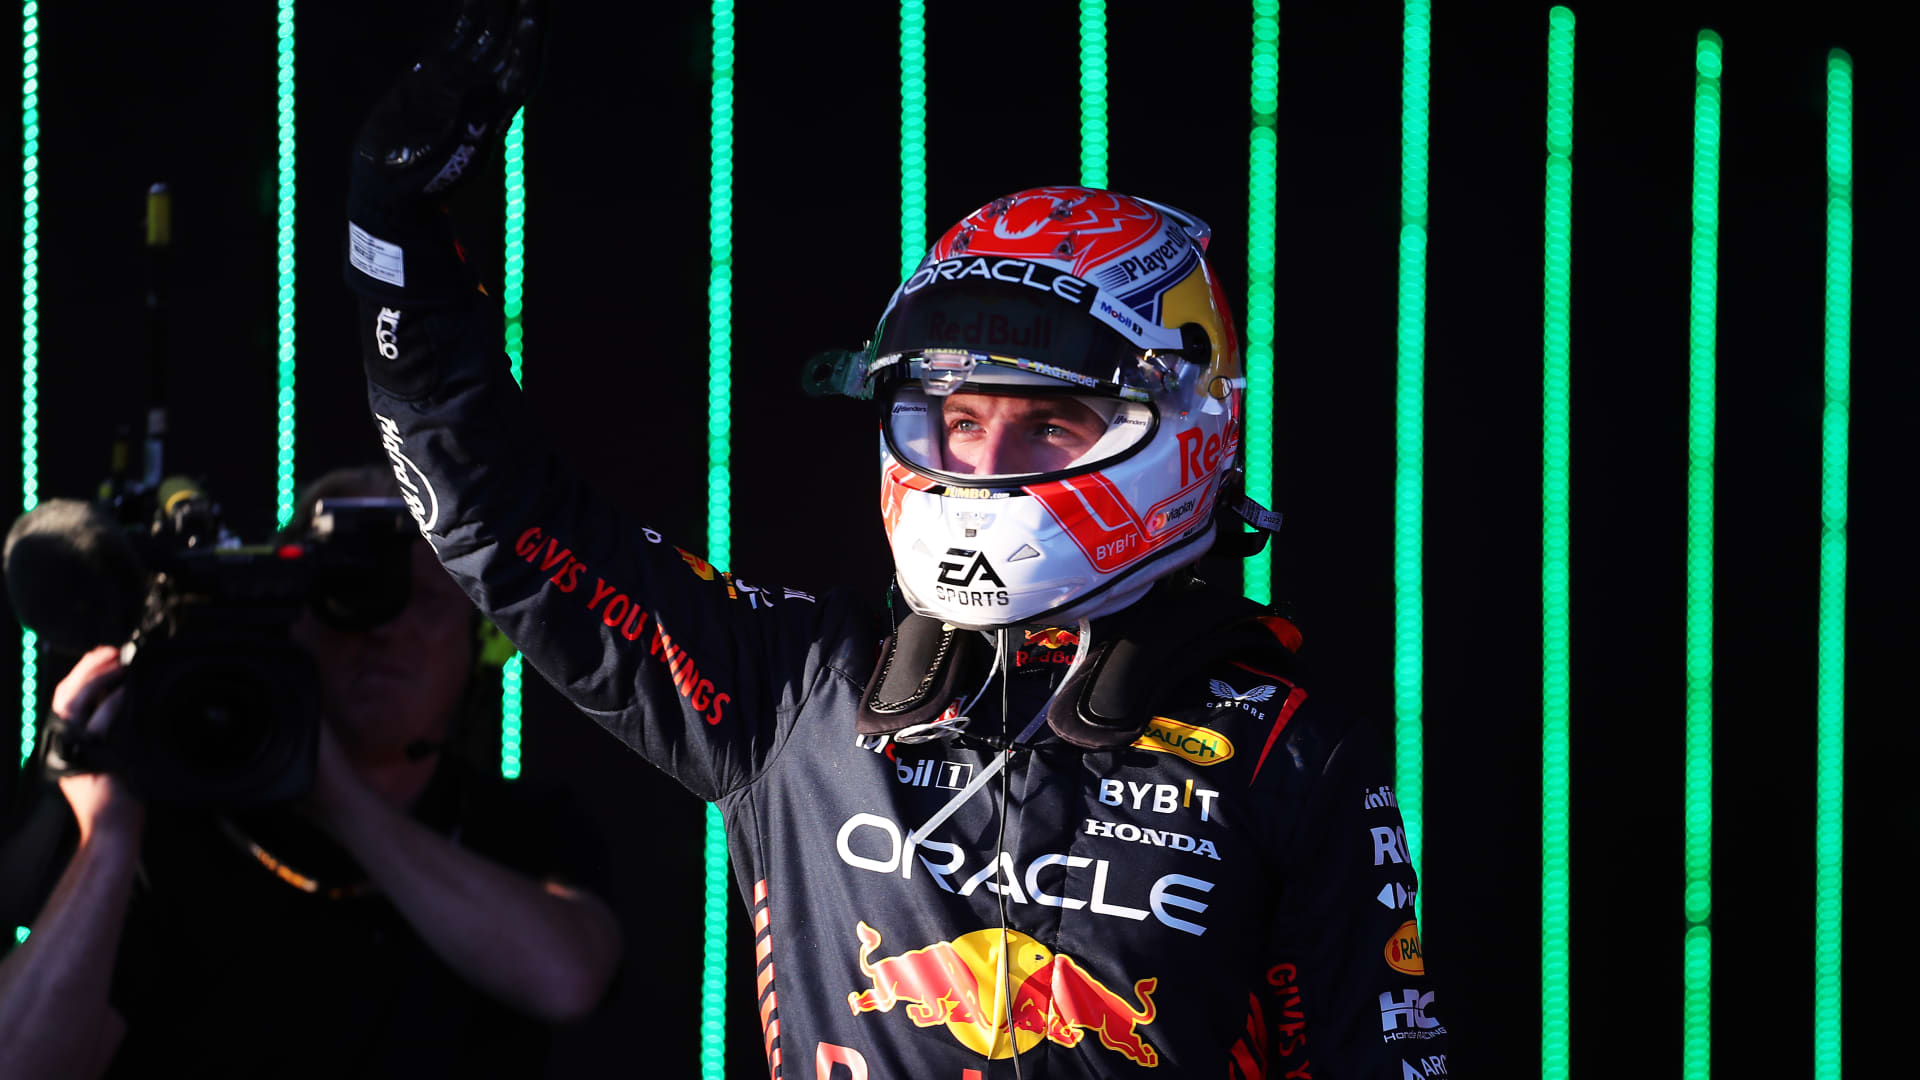 Photo of Australian GP: Max Verstappen holds off Lewis Hamilton for victory after wild finish to chaotic race